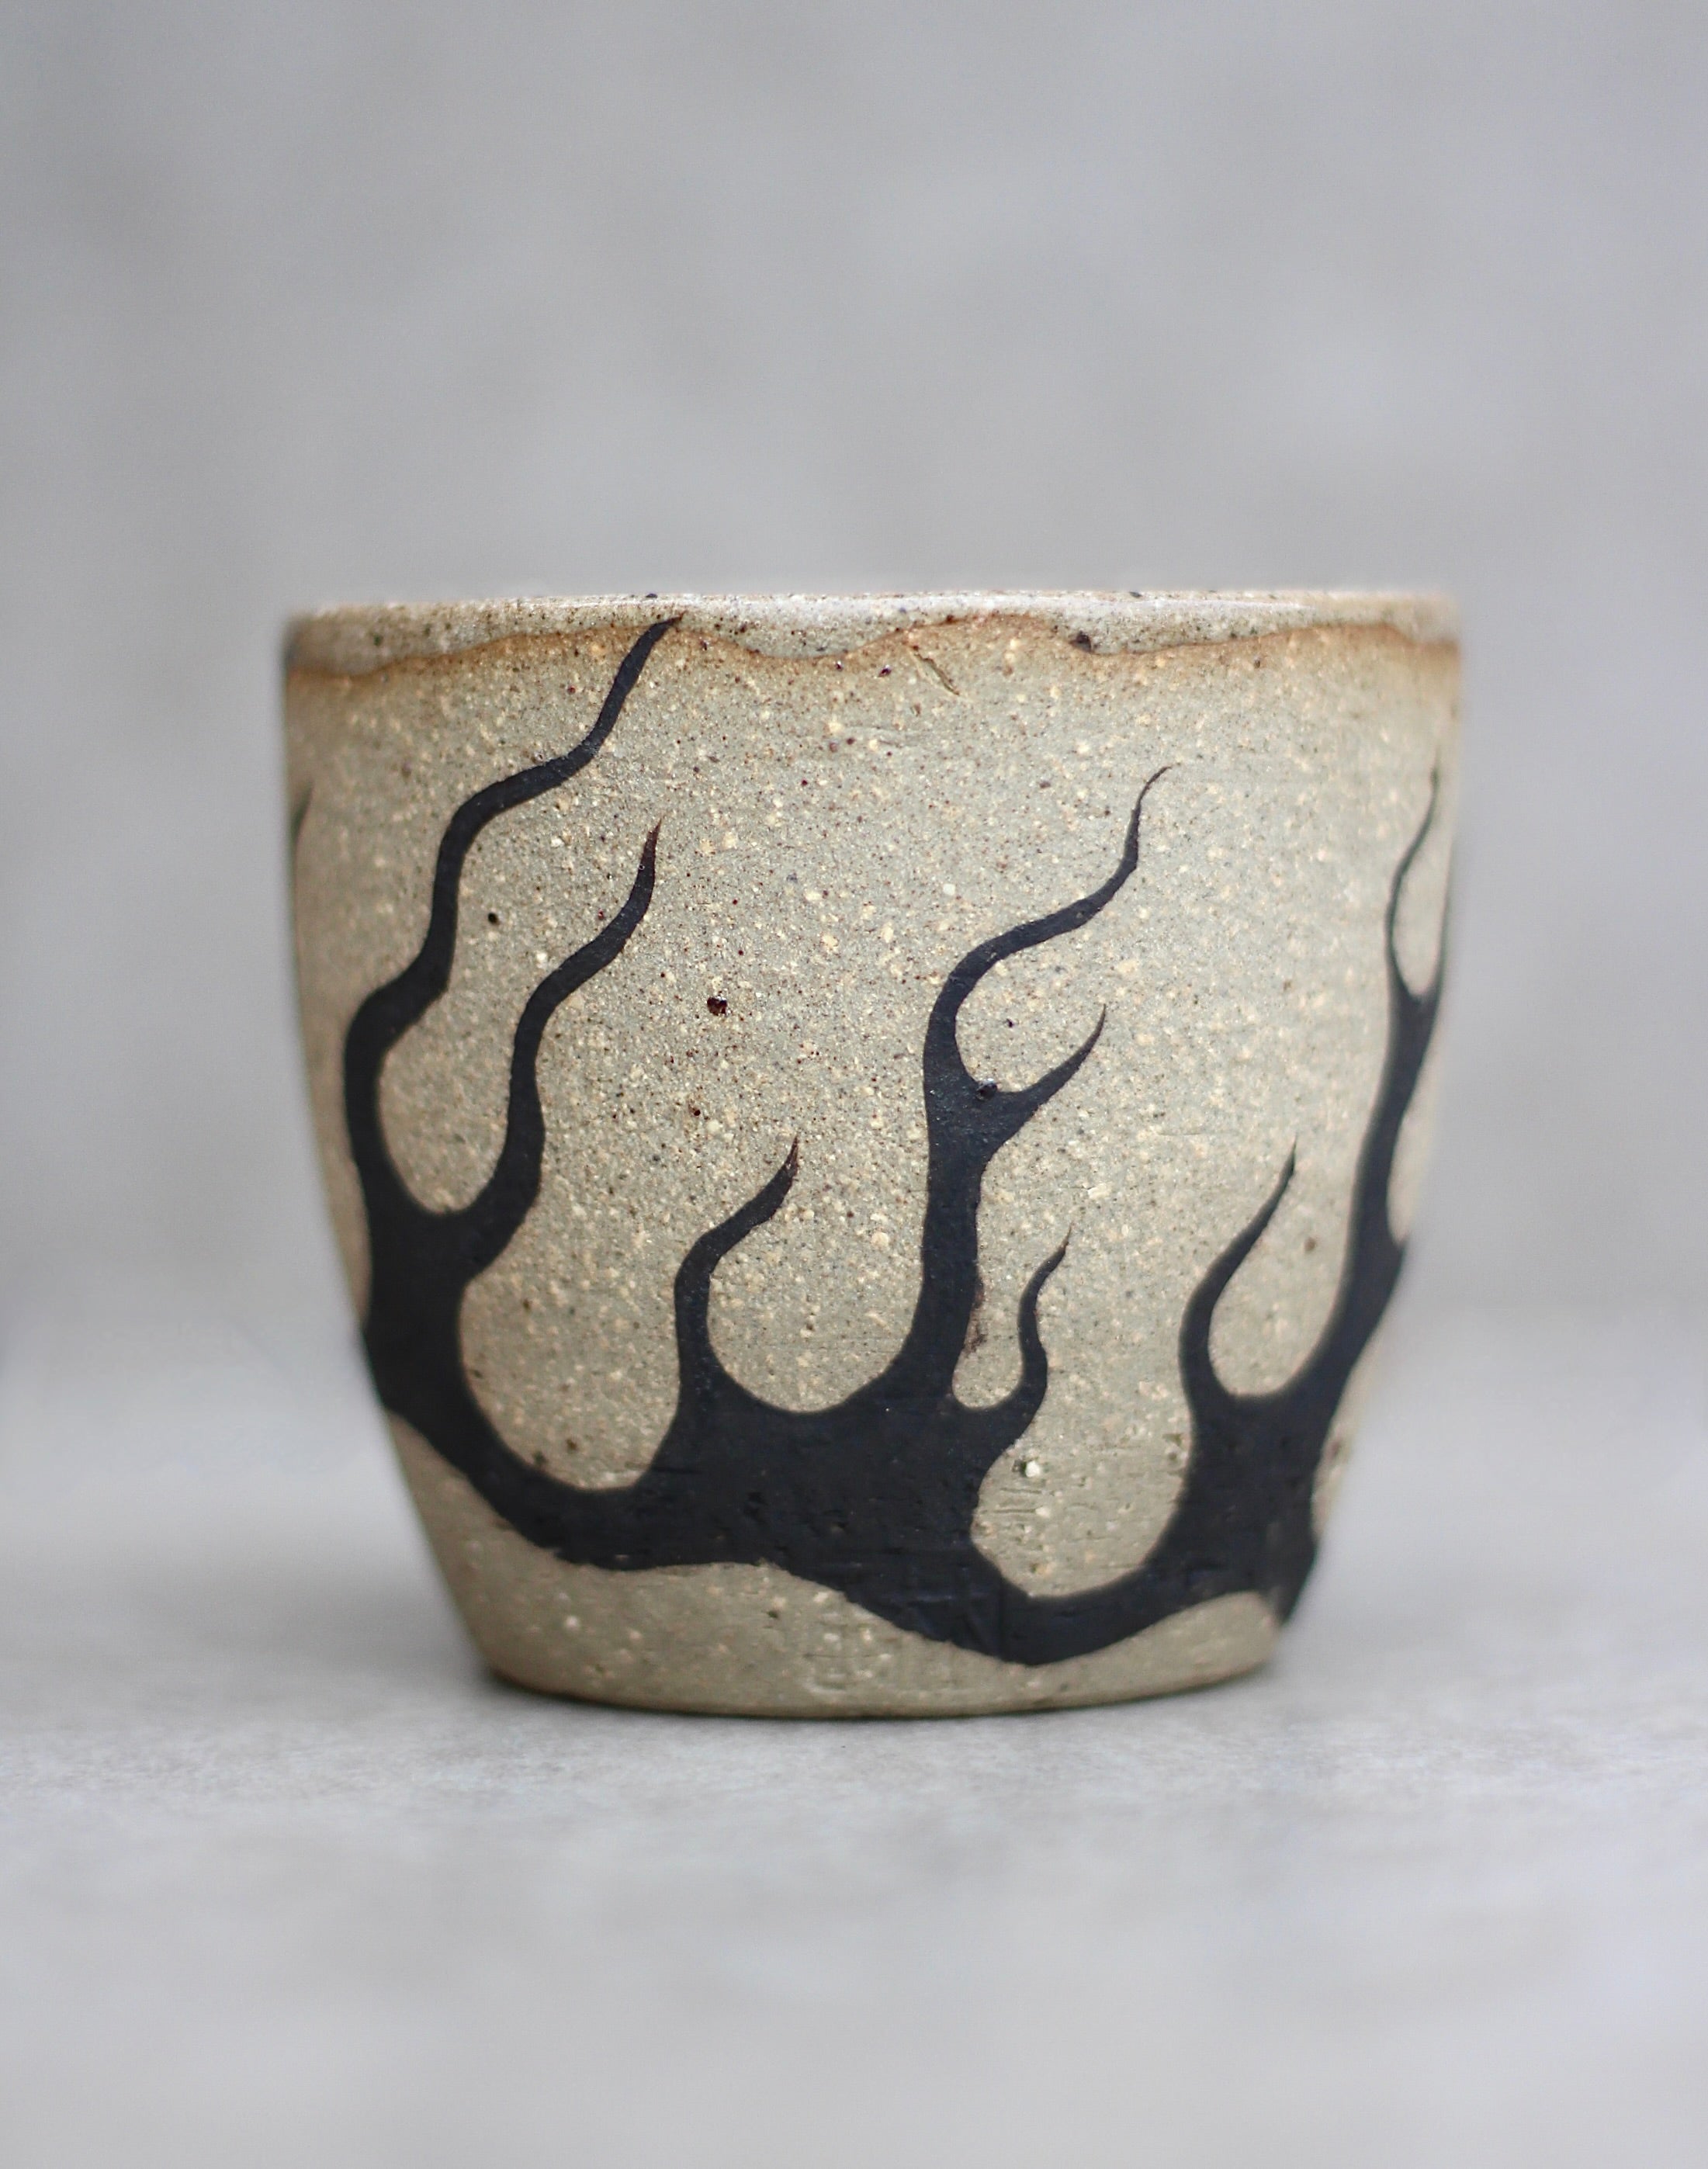 Small Flame Cup with wood ash